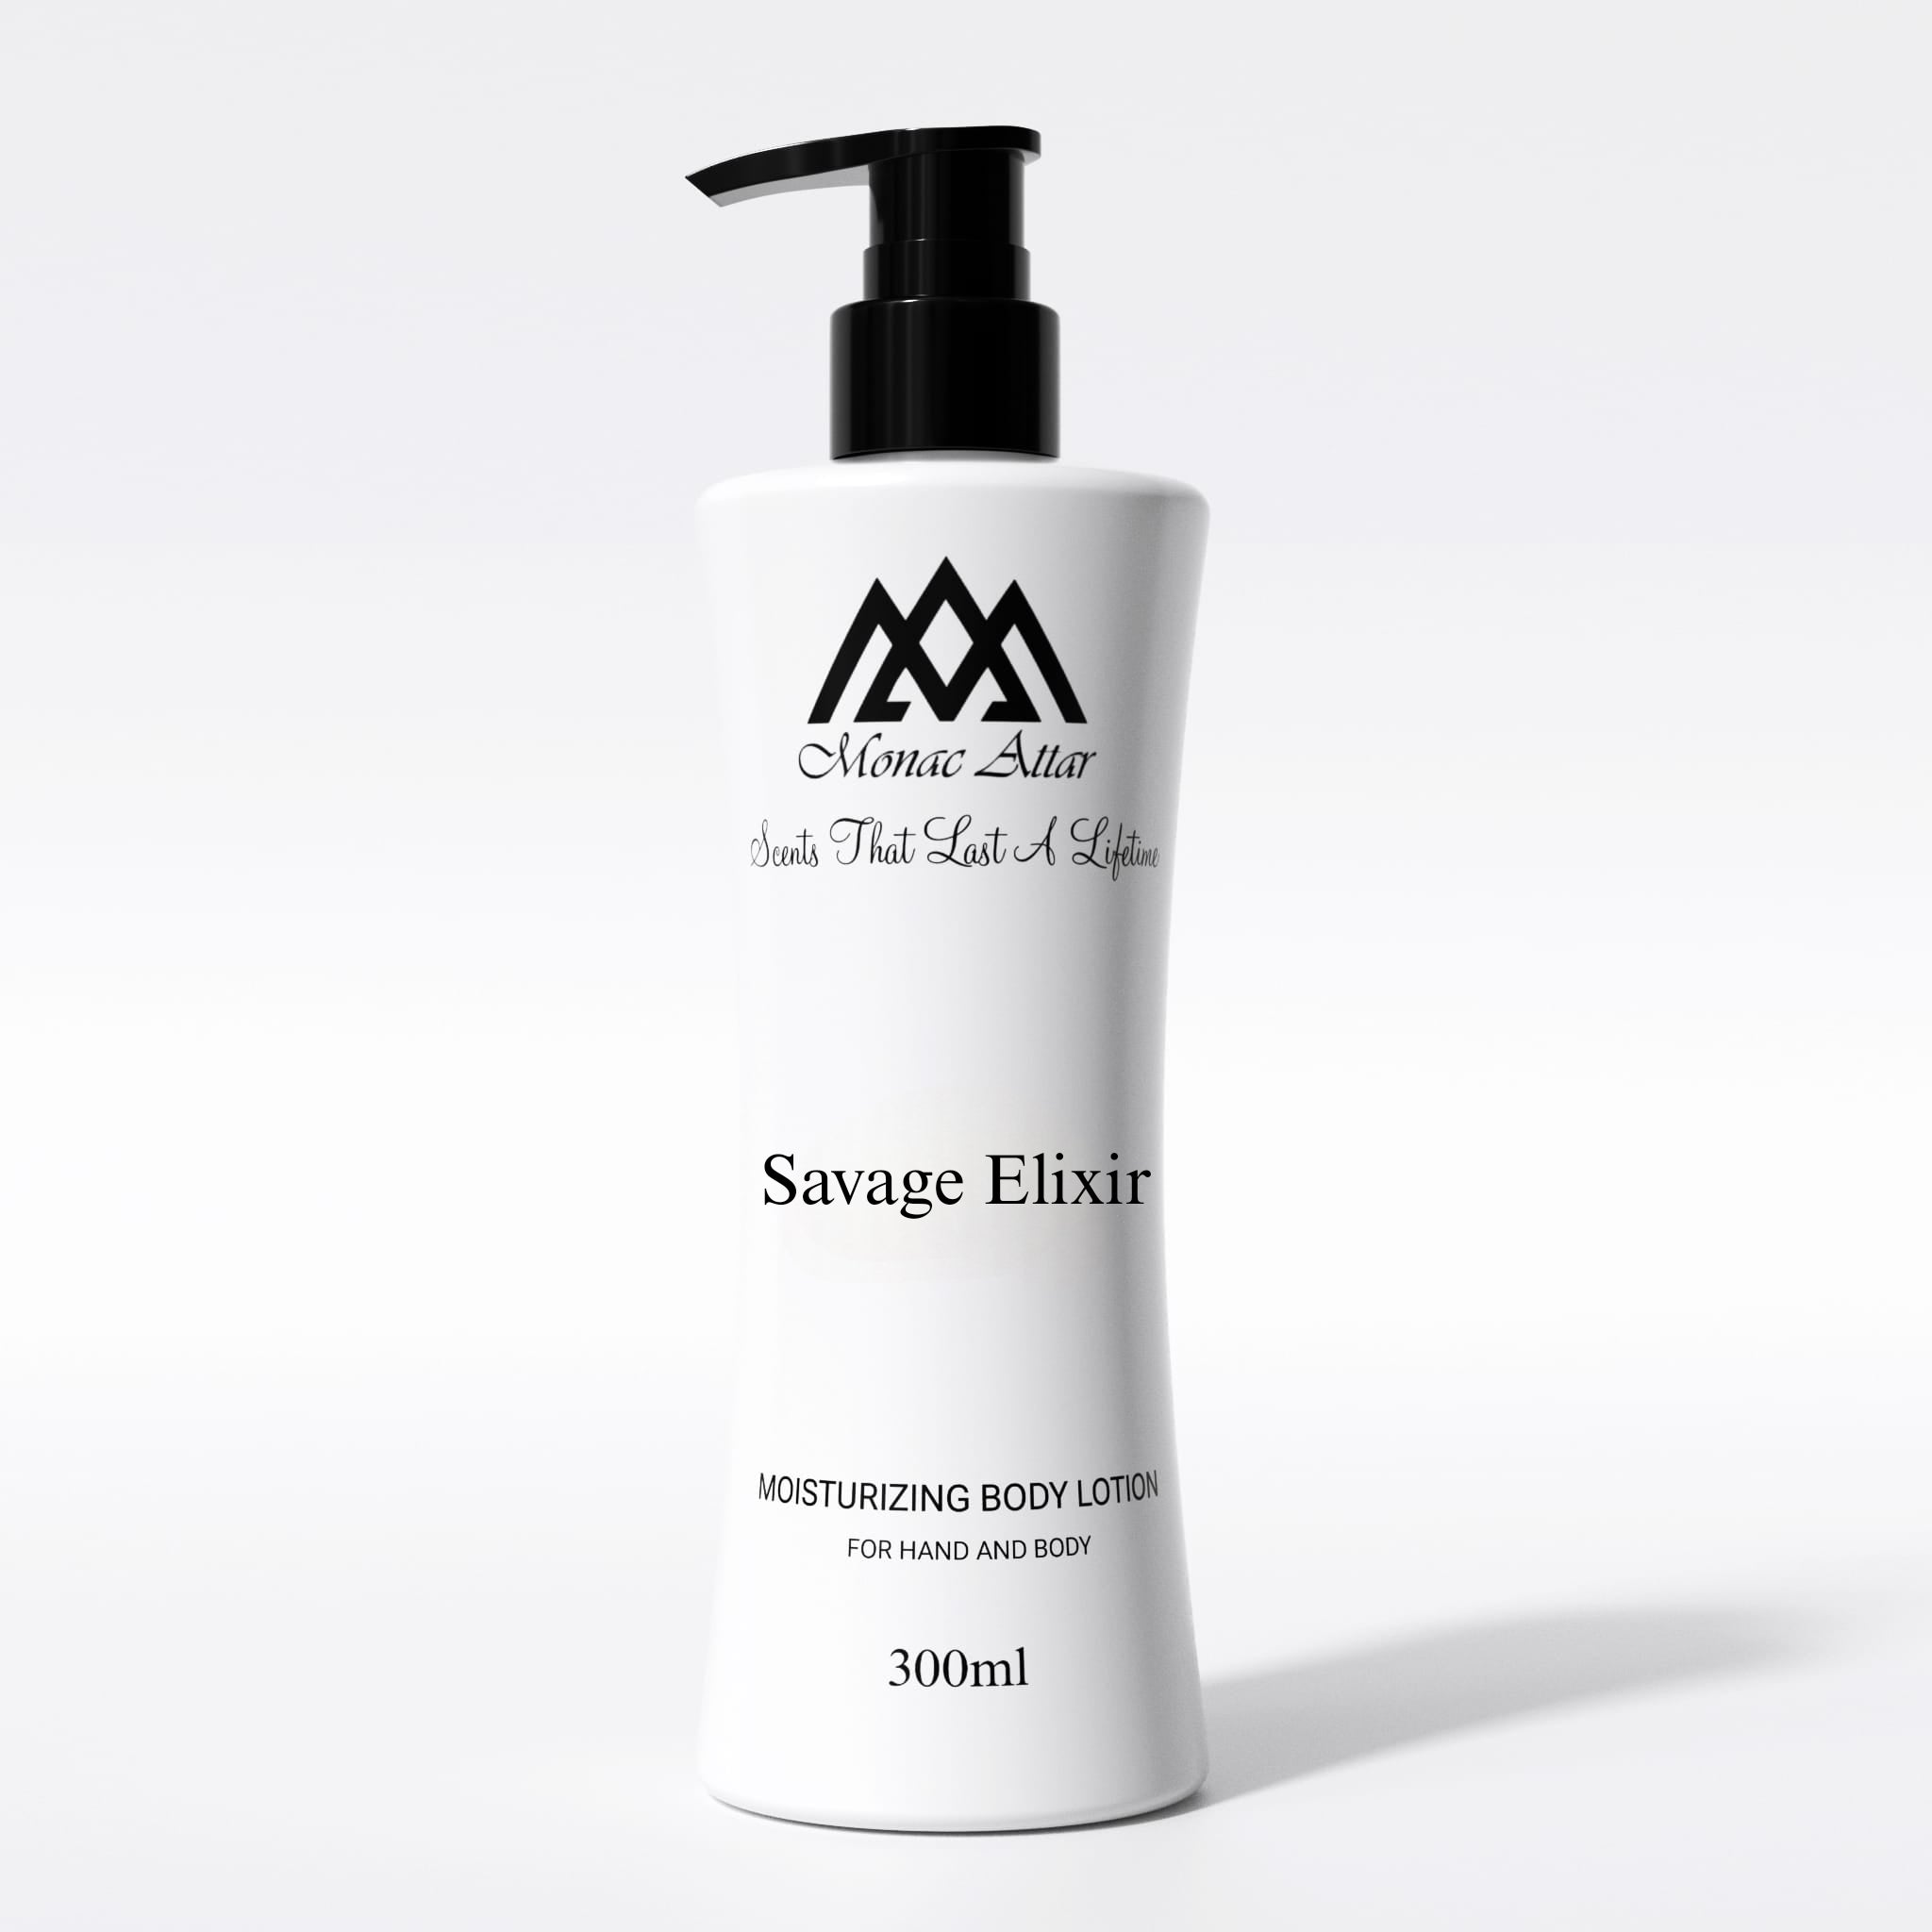 Savage Elixir Body Lotion Inspired by Dior Sauvage Elixir